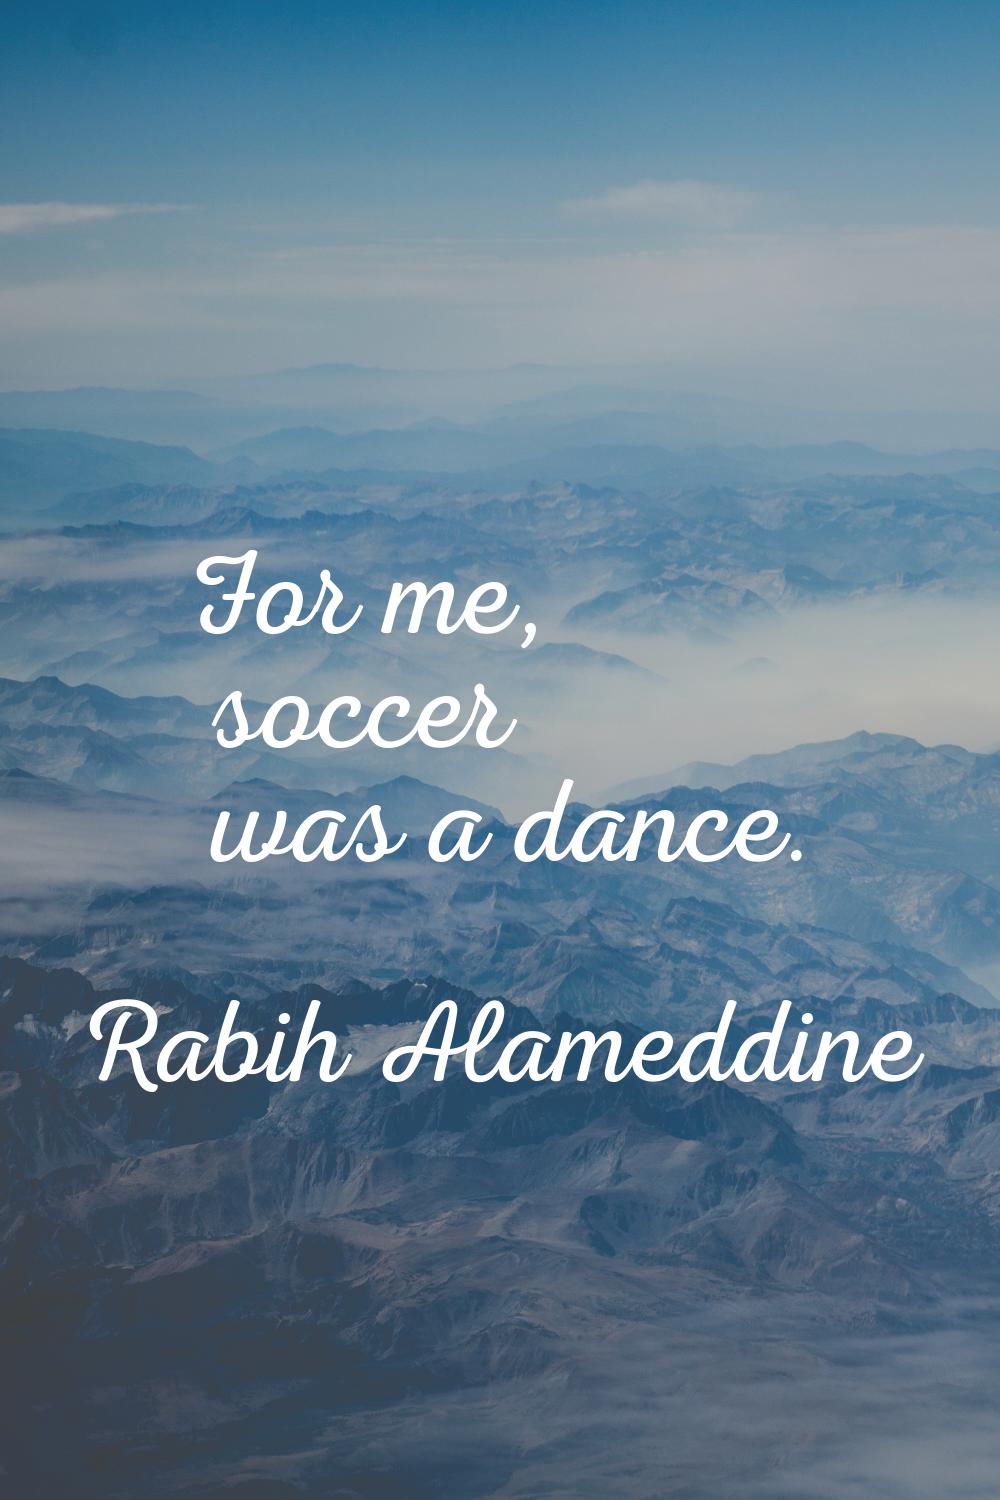 For me, soccer was a dance.